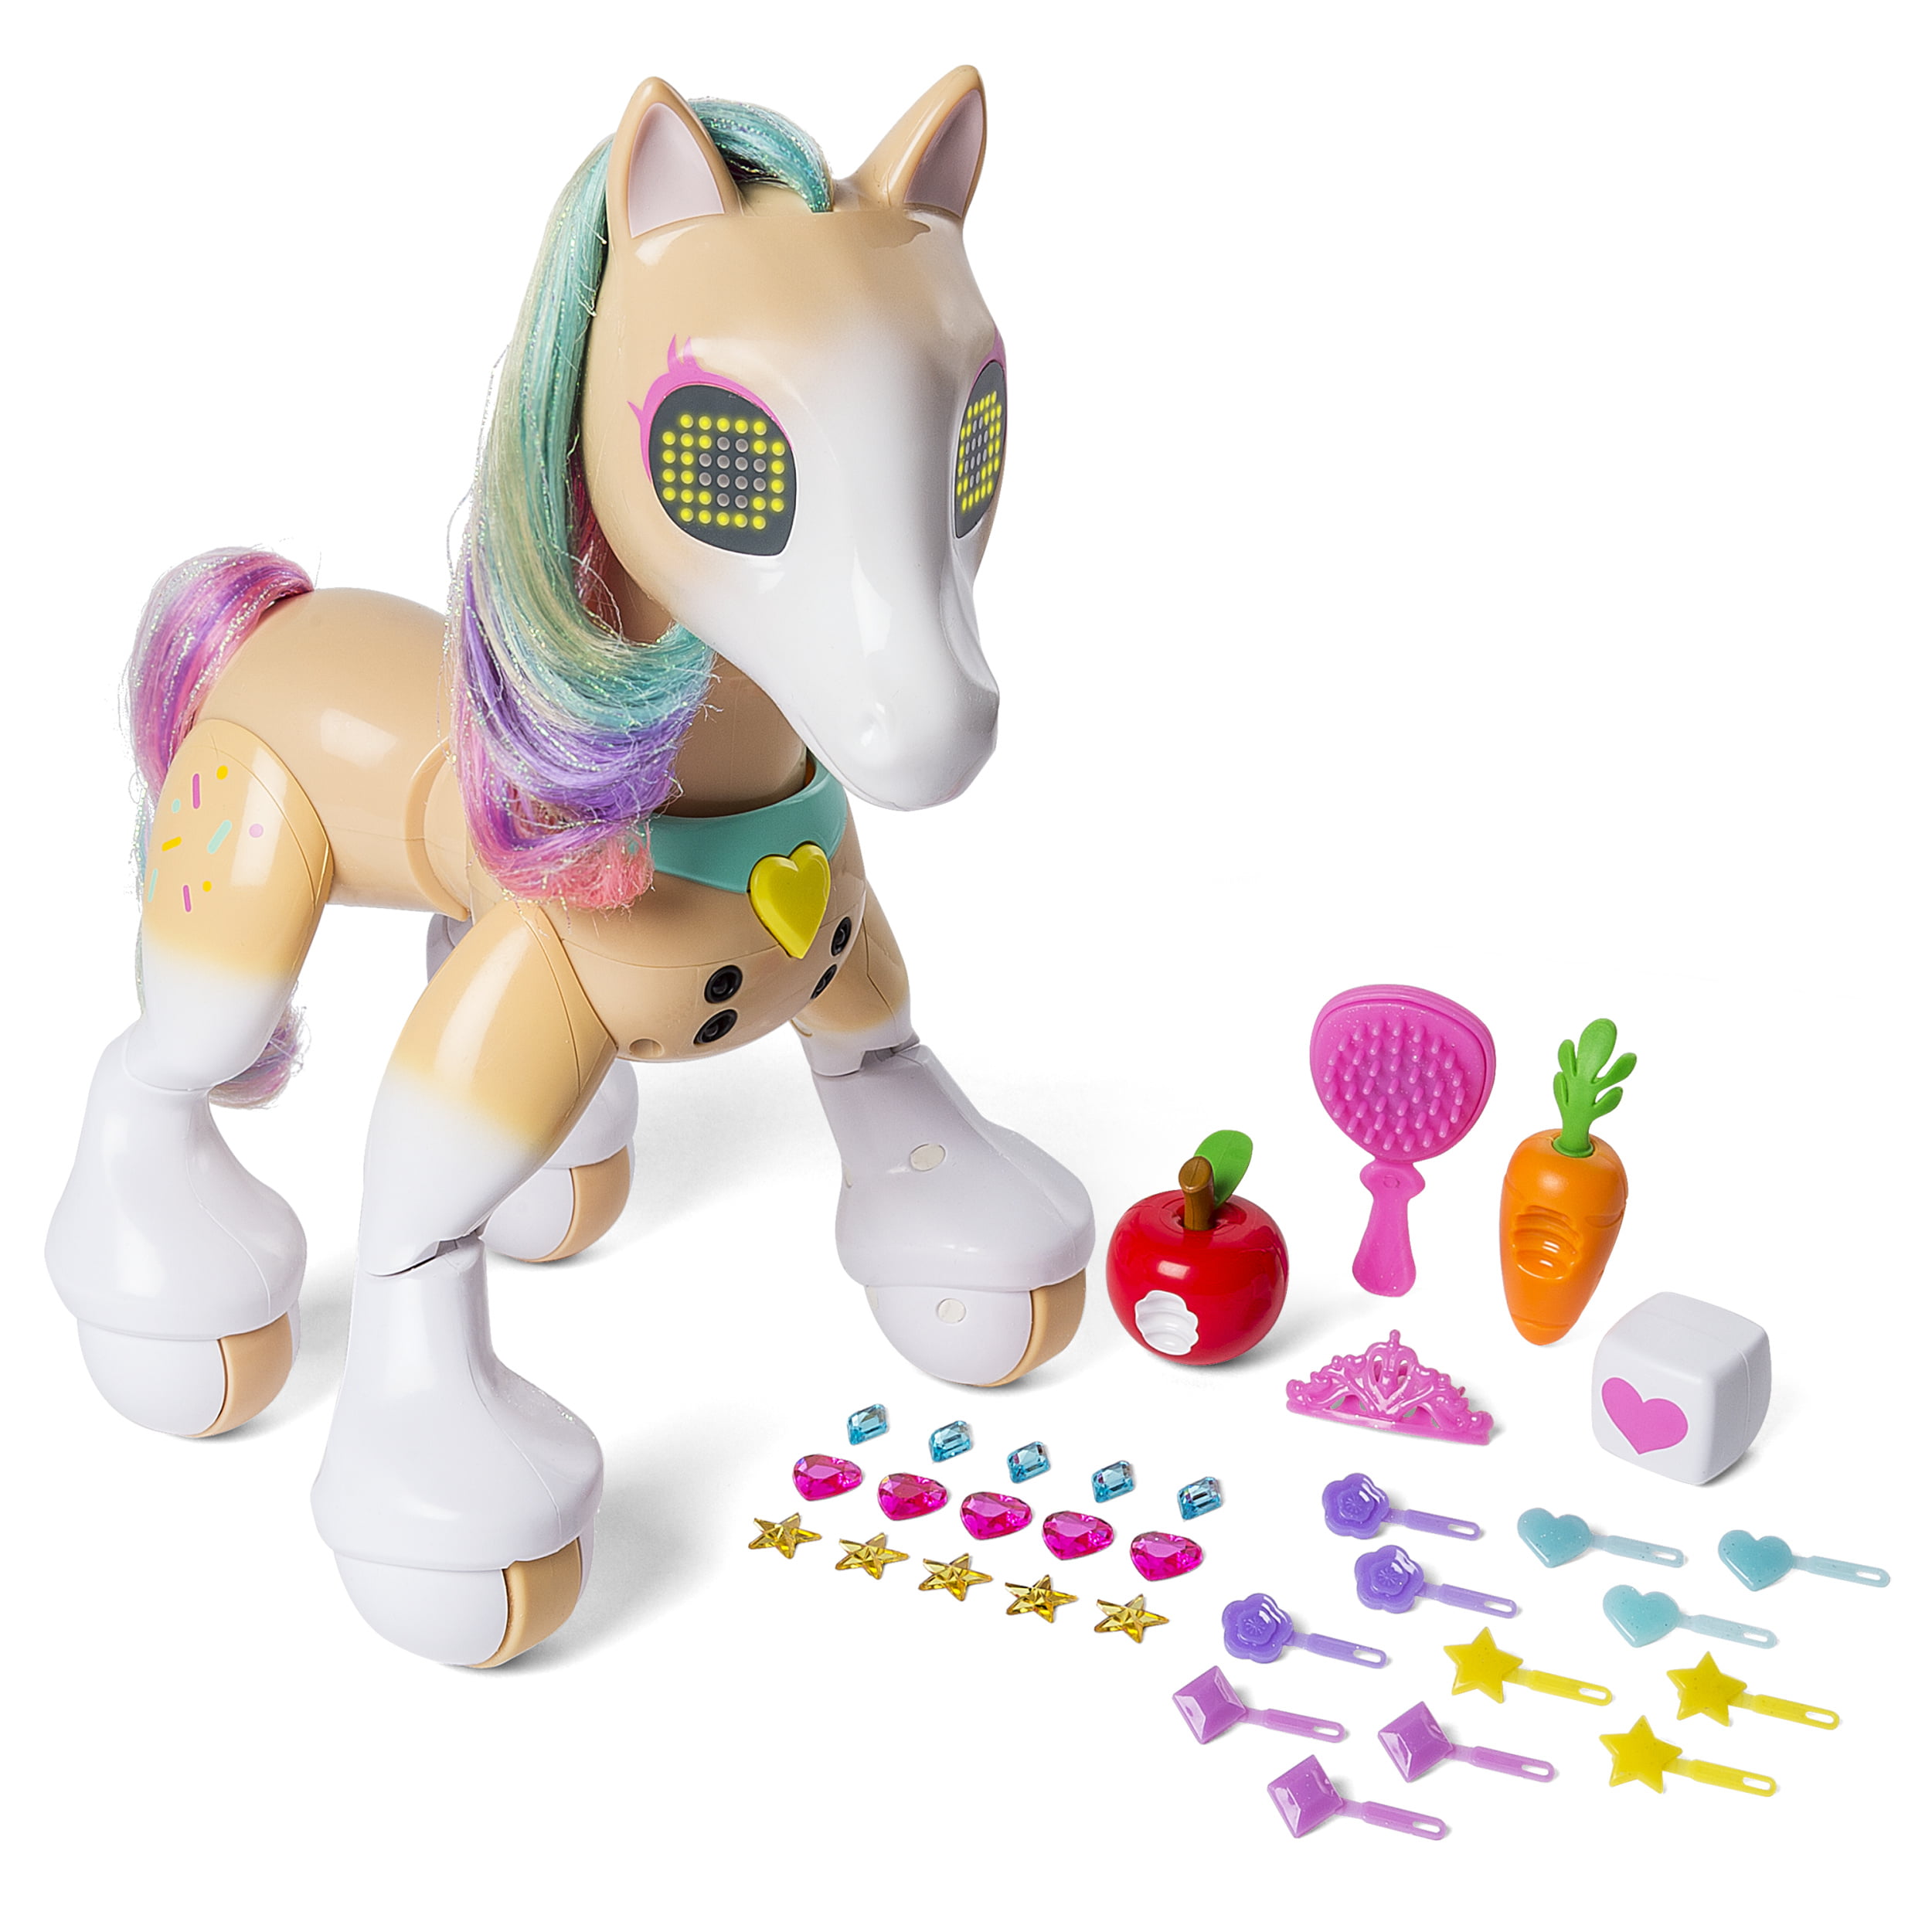 Zoomer Show Pony Doll Toy Lights Sounds Interactive Movement Girls Kids Gift New 